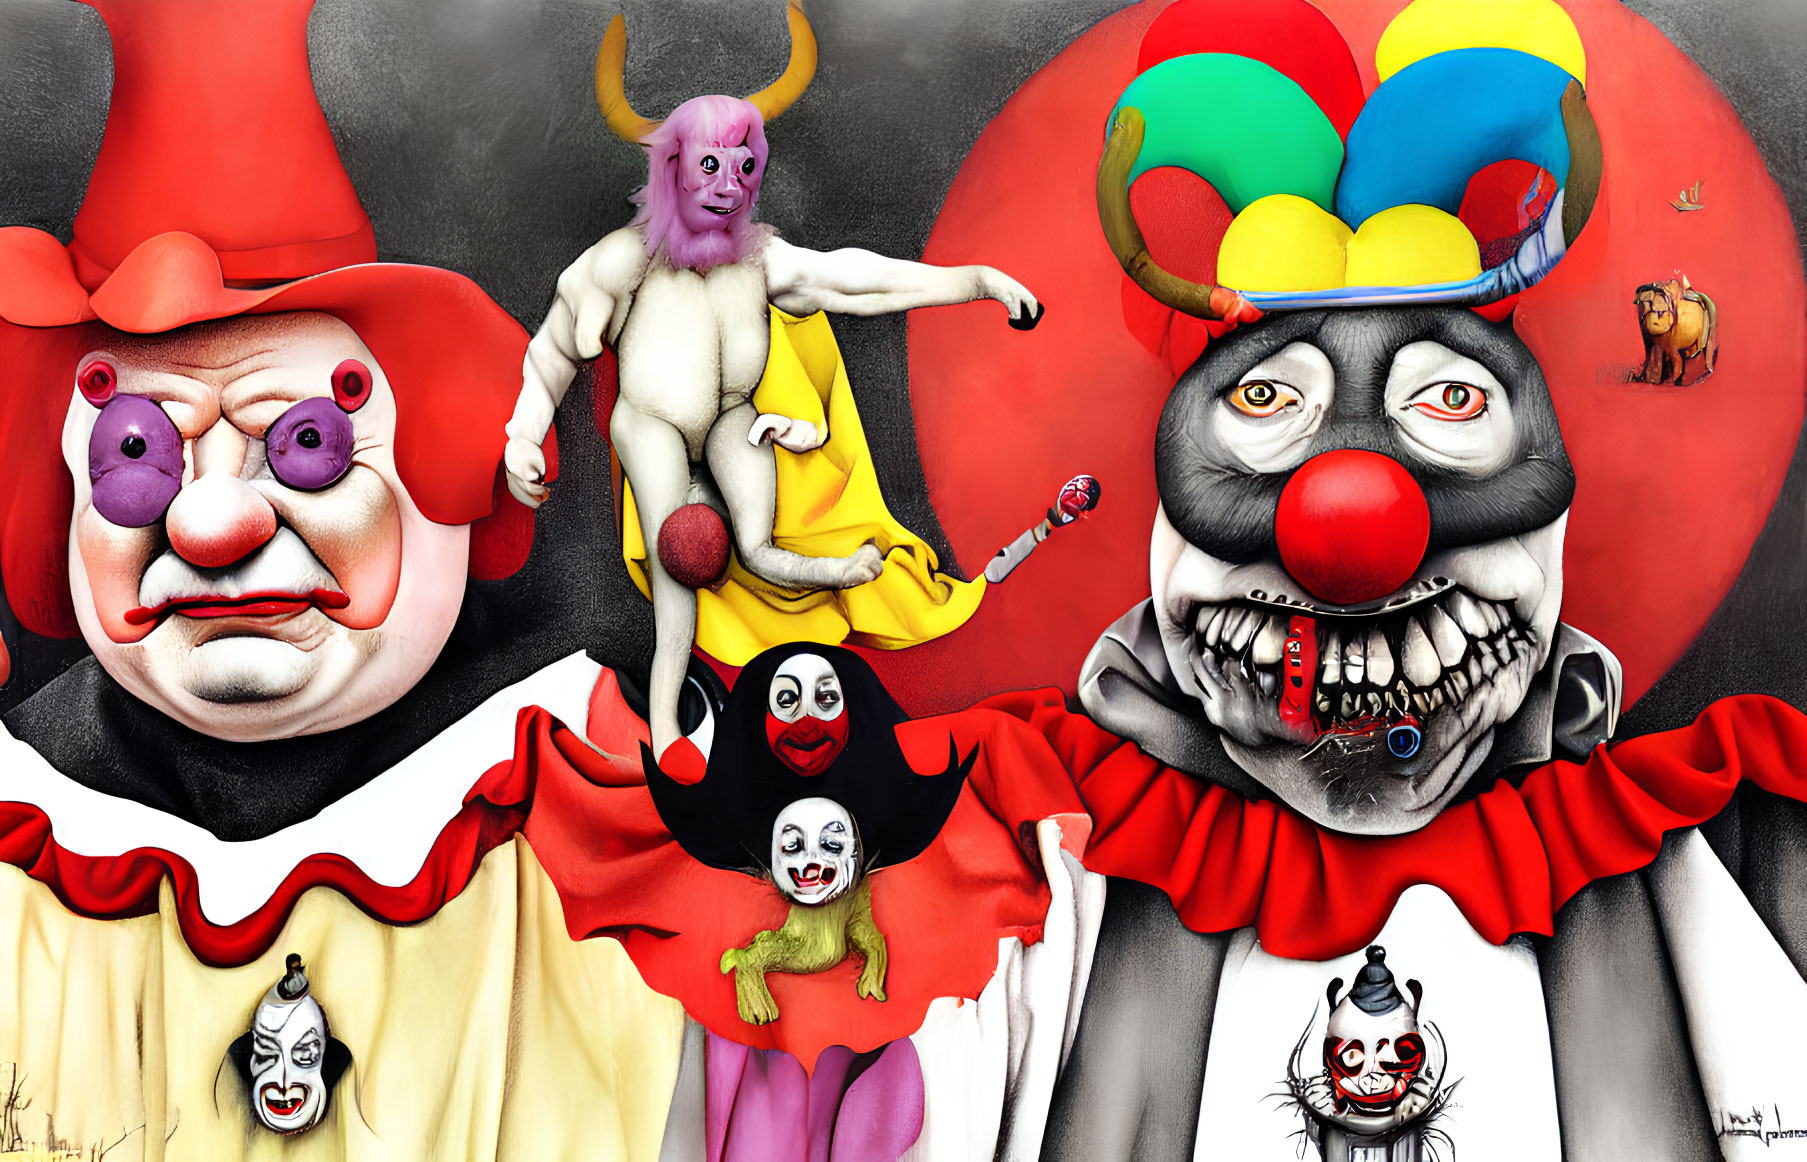 Array of Sinister Clown Faces in Colorful Variety